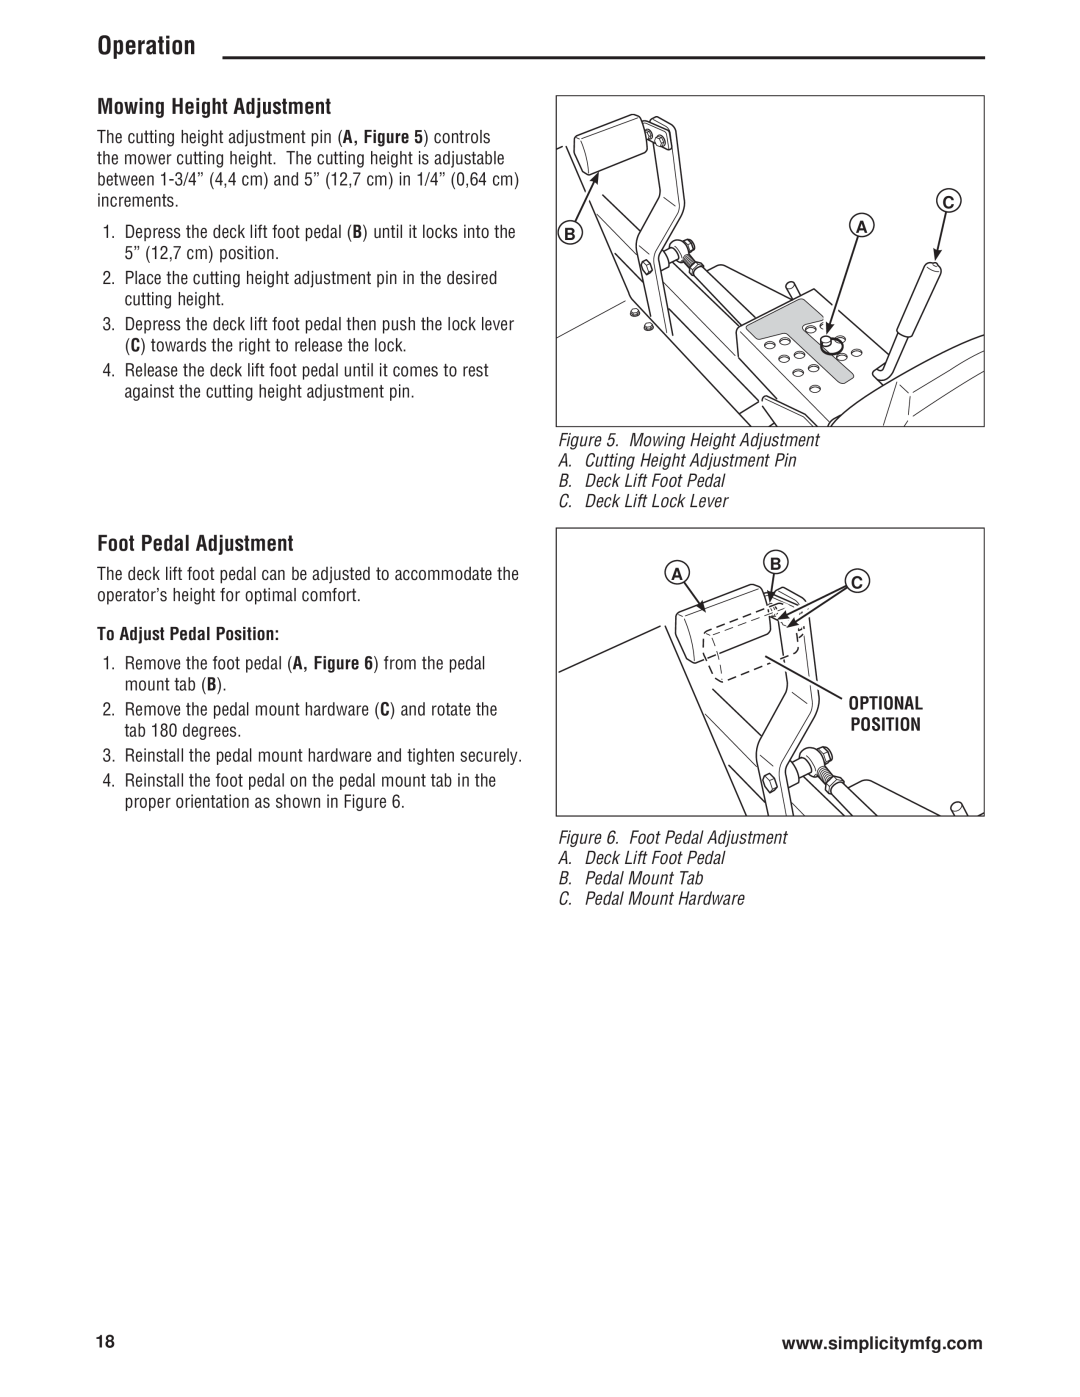 Simplicity 543777-0113-E1, 5101604 Mowing Height Adjustment, Foot Pedal Adjustment, Operation, To Adjust Pedal Position 